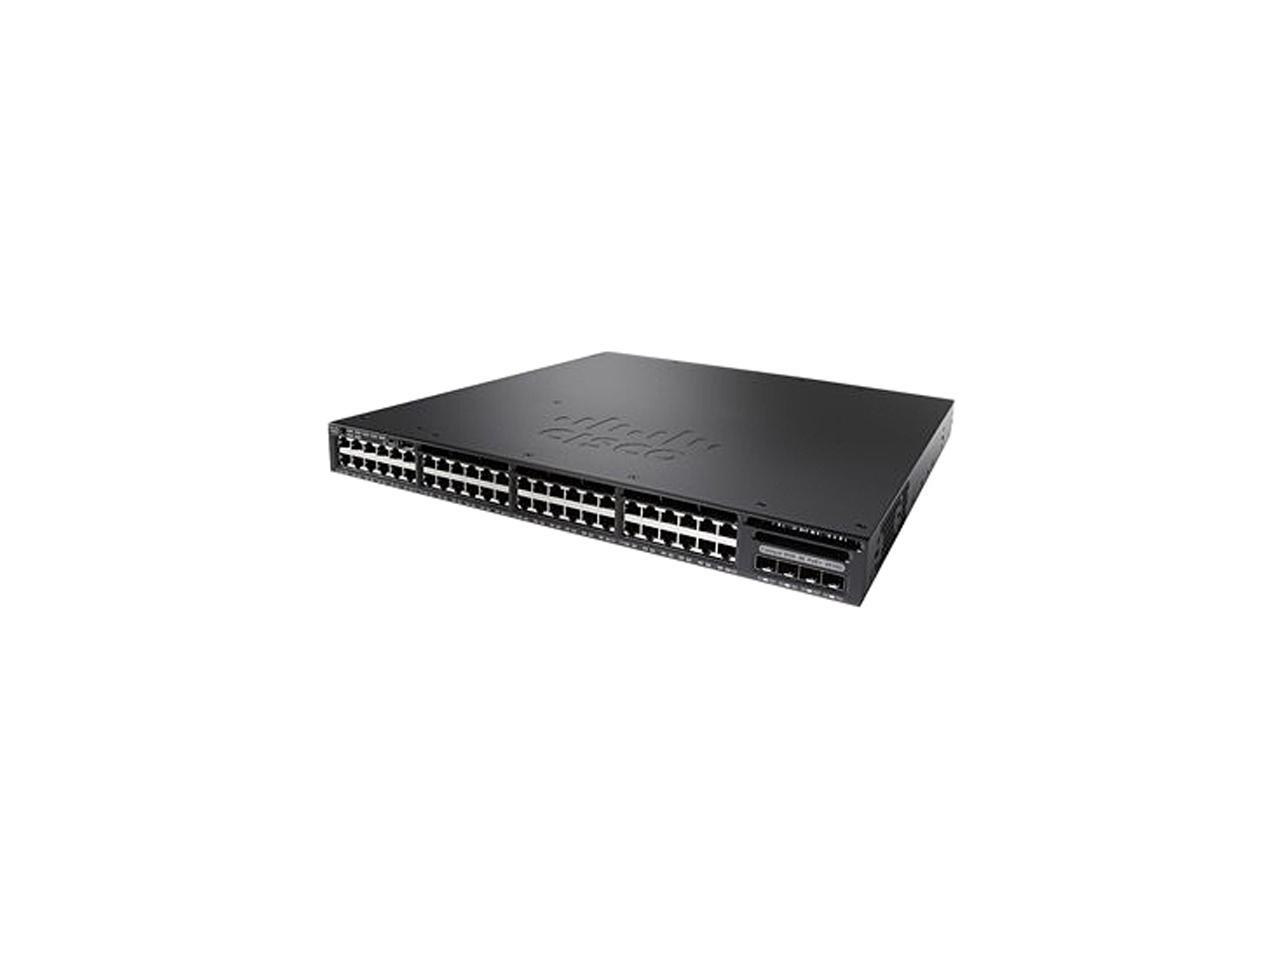 CISCO WS-C3650-48TS-S Managed Layer 3 Switch